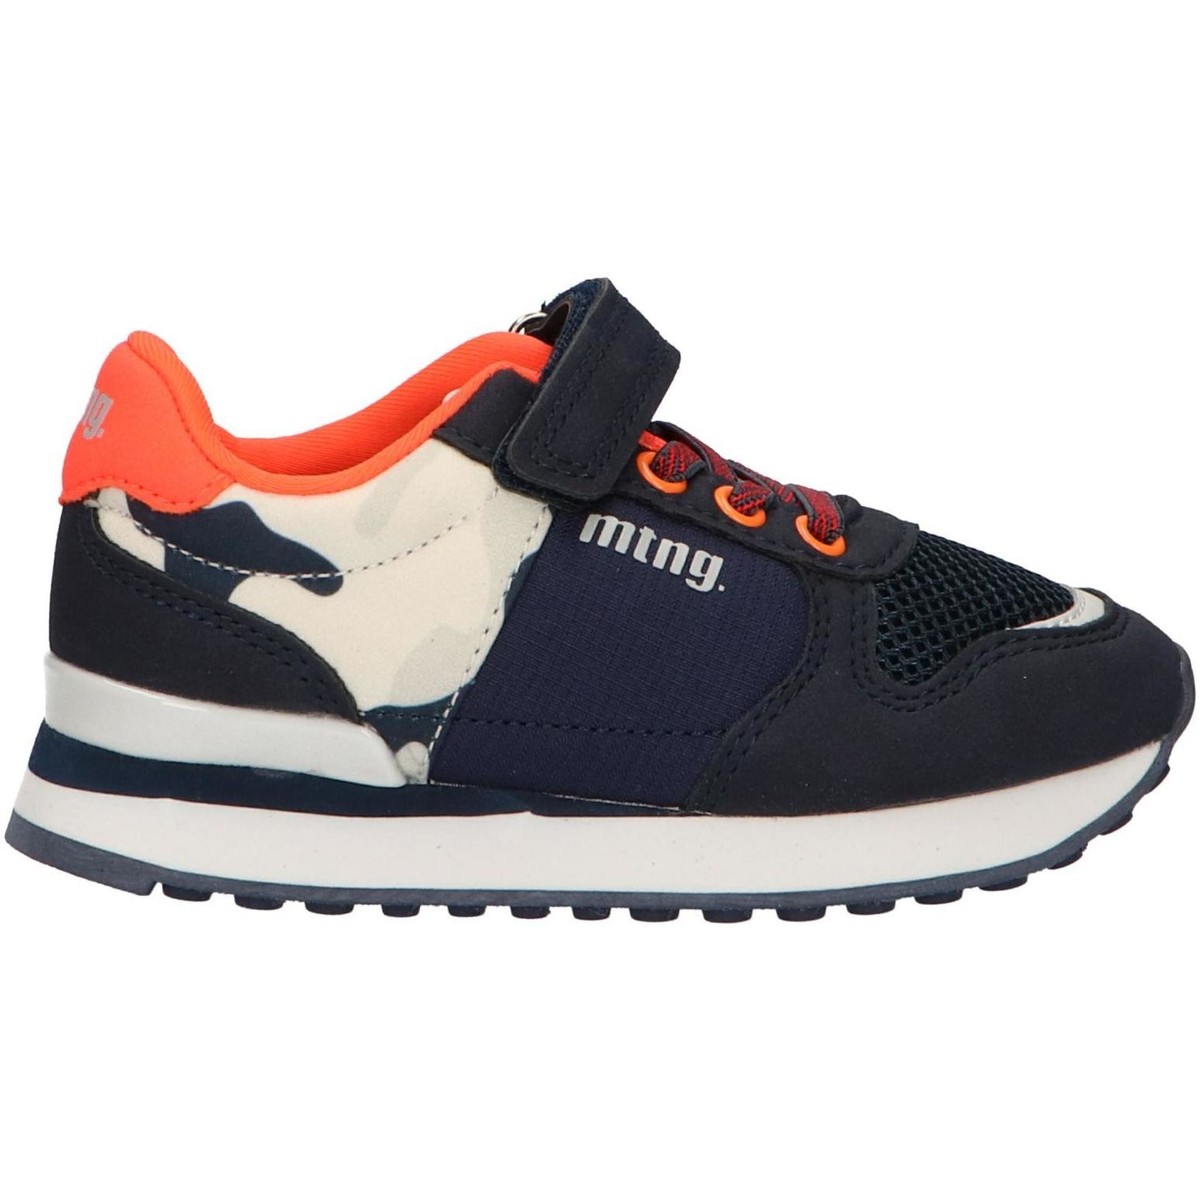 Chaussures Fille Multisport MTNG 47733 47733 